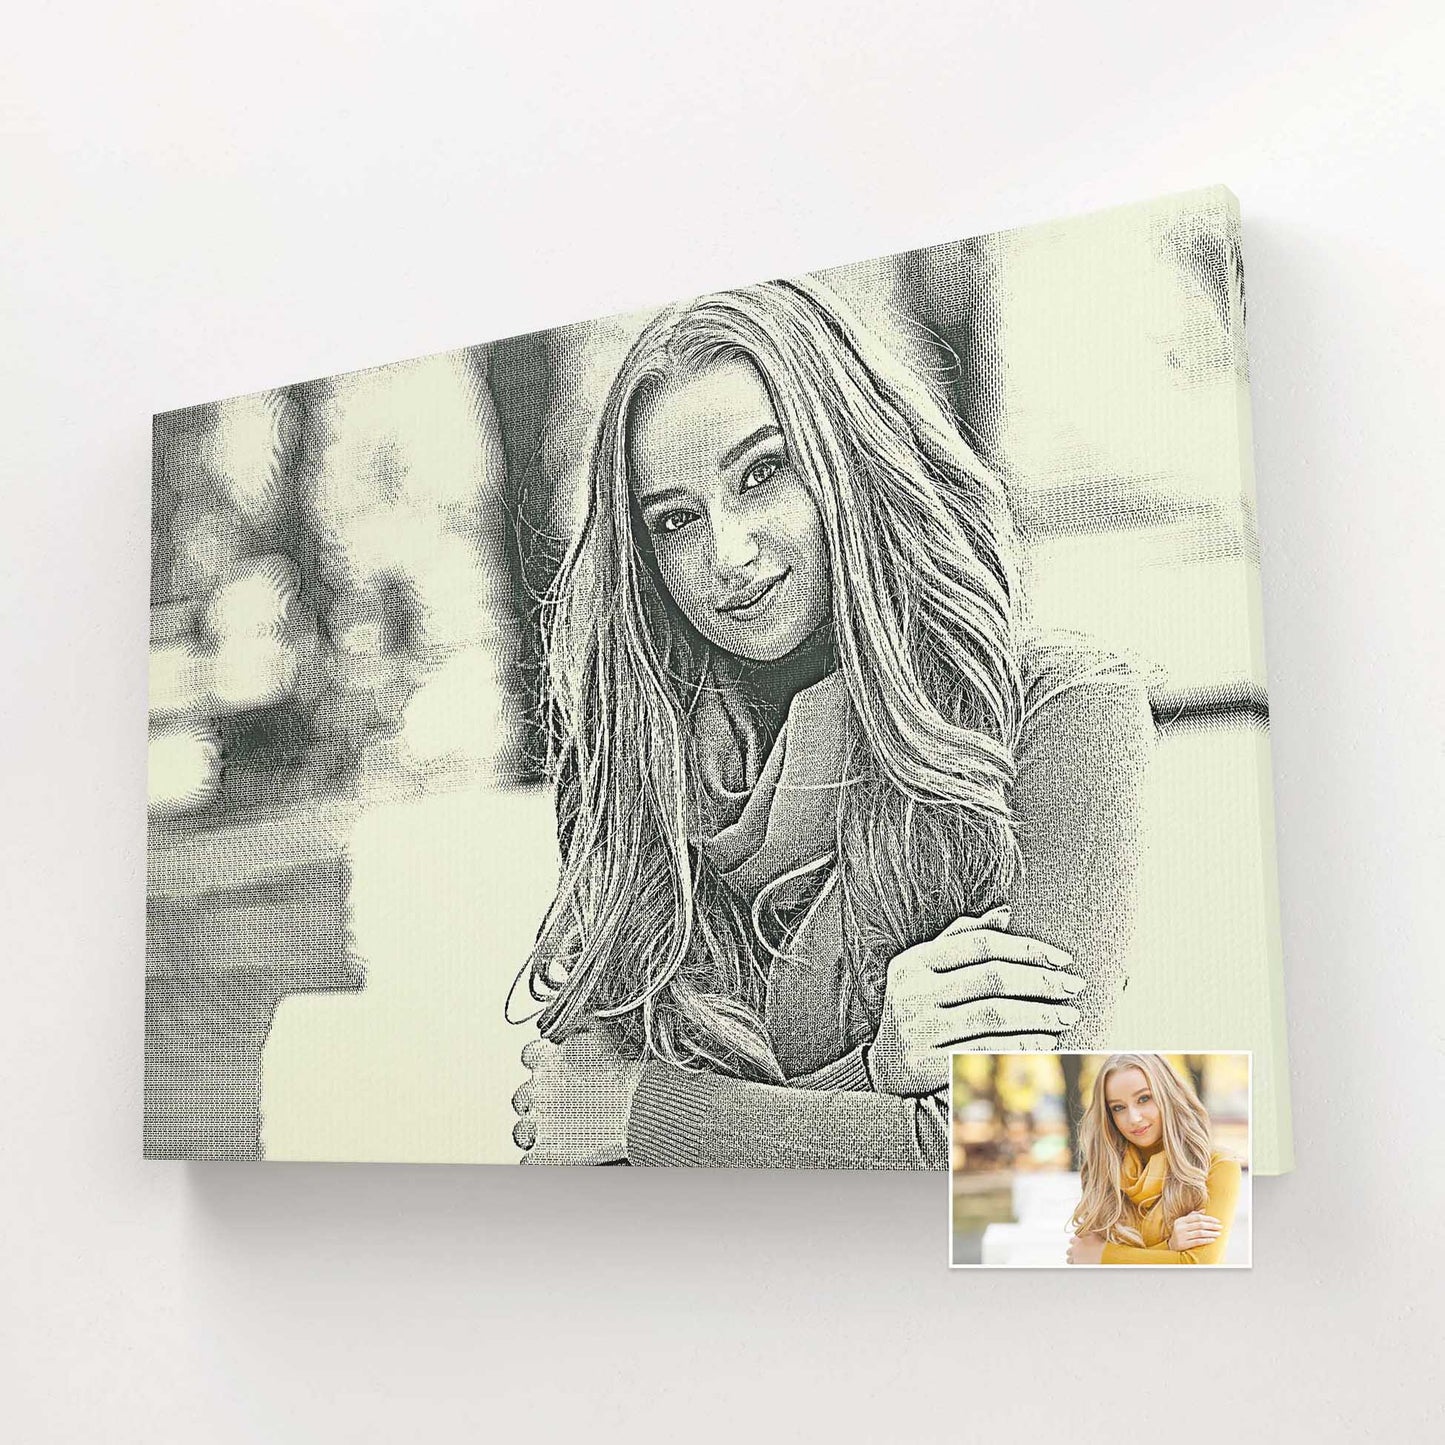 Personalised Money Engraved Canvas offers a blend of elegance and charm